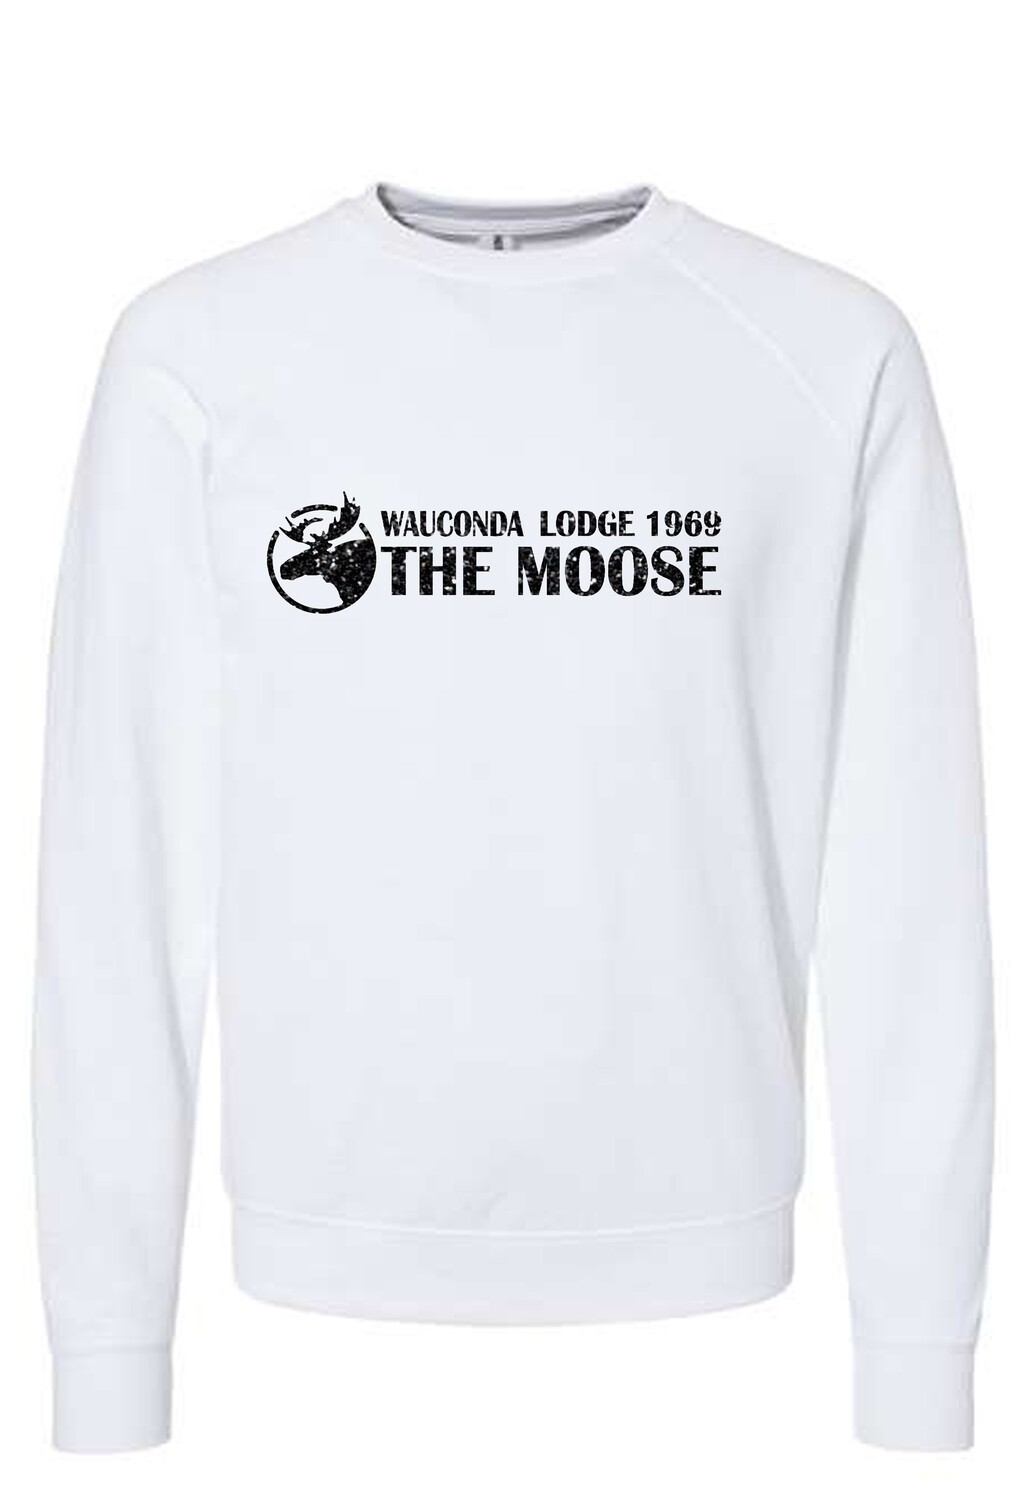 The Moose Unisex Lightweight Terry Crewneck with Glitter